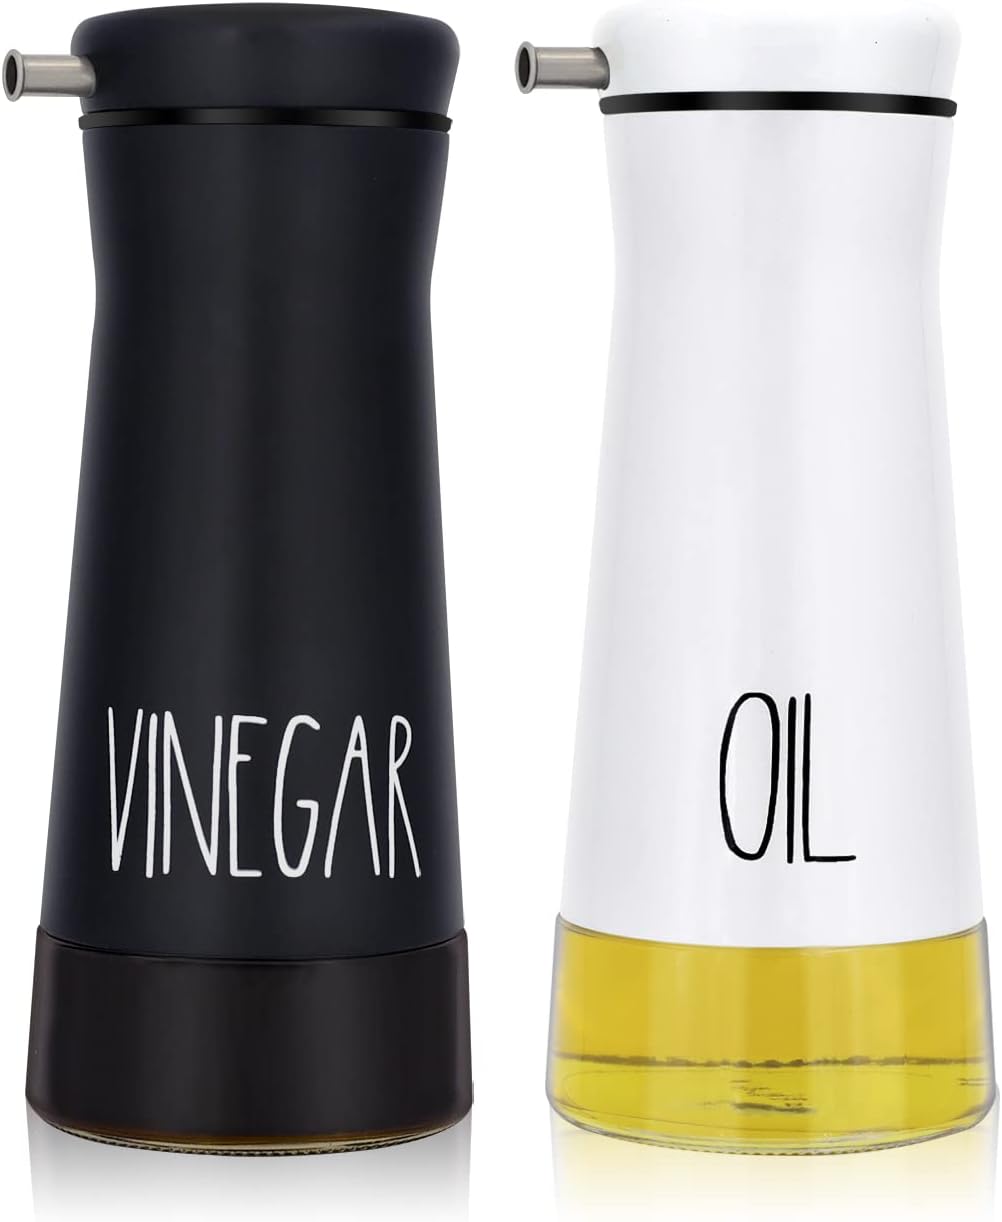 Aelga Black and White Oil And Vinegar Dispenser Set – 2 Pack Glass Oil Dispenser Bottle for Kitchen with Drip Free – Cute Farmhouse Kitchen Decor and Accessories for Home Restaurants